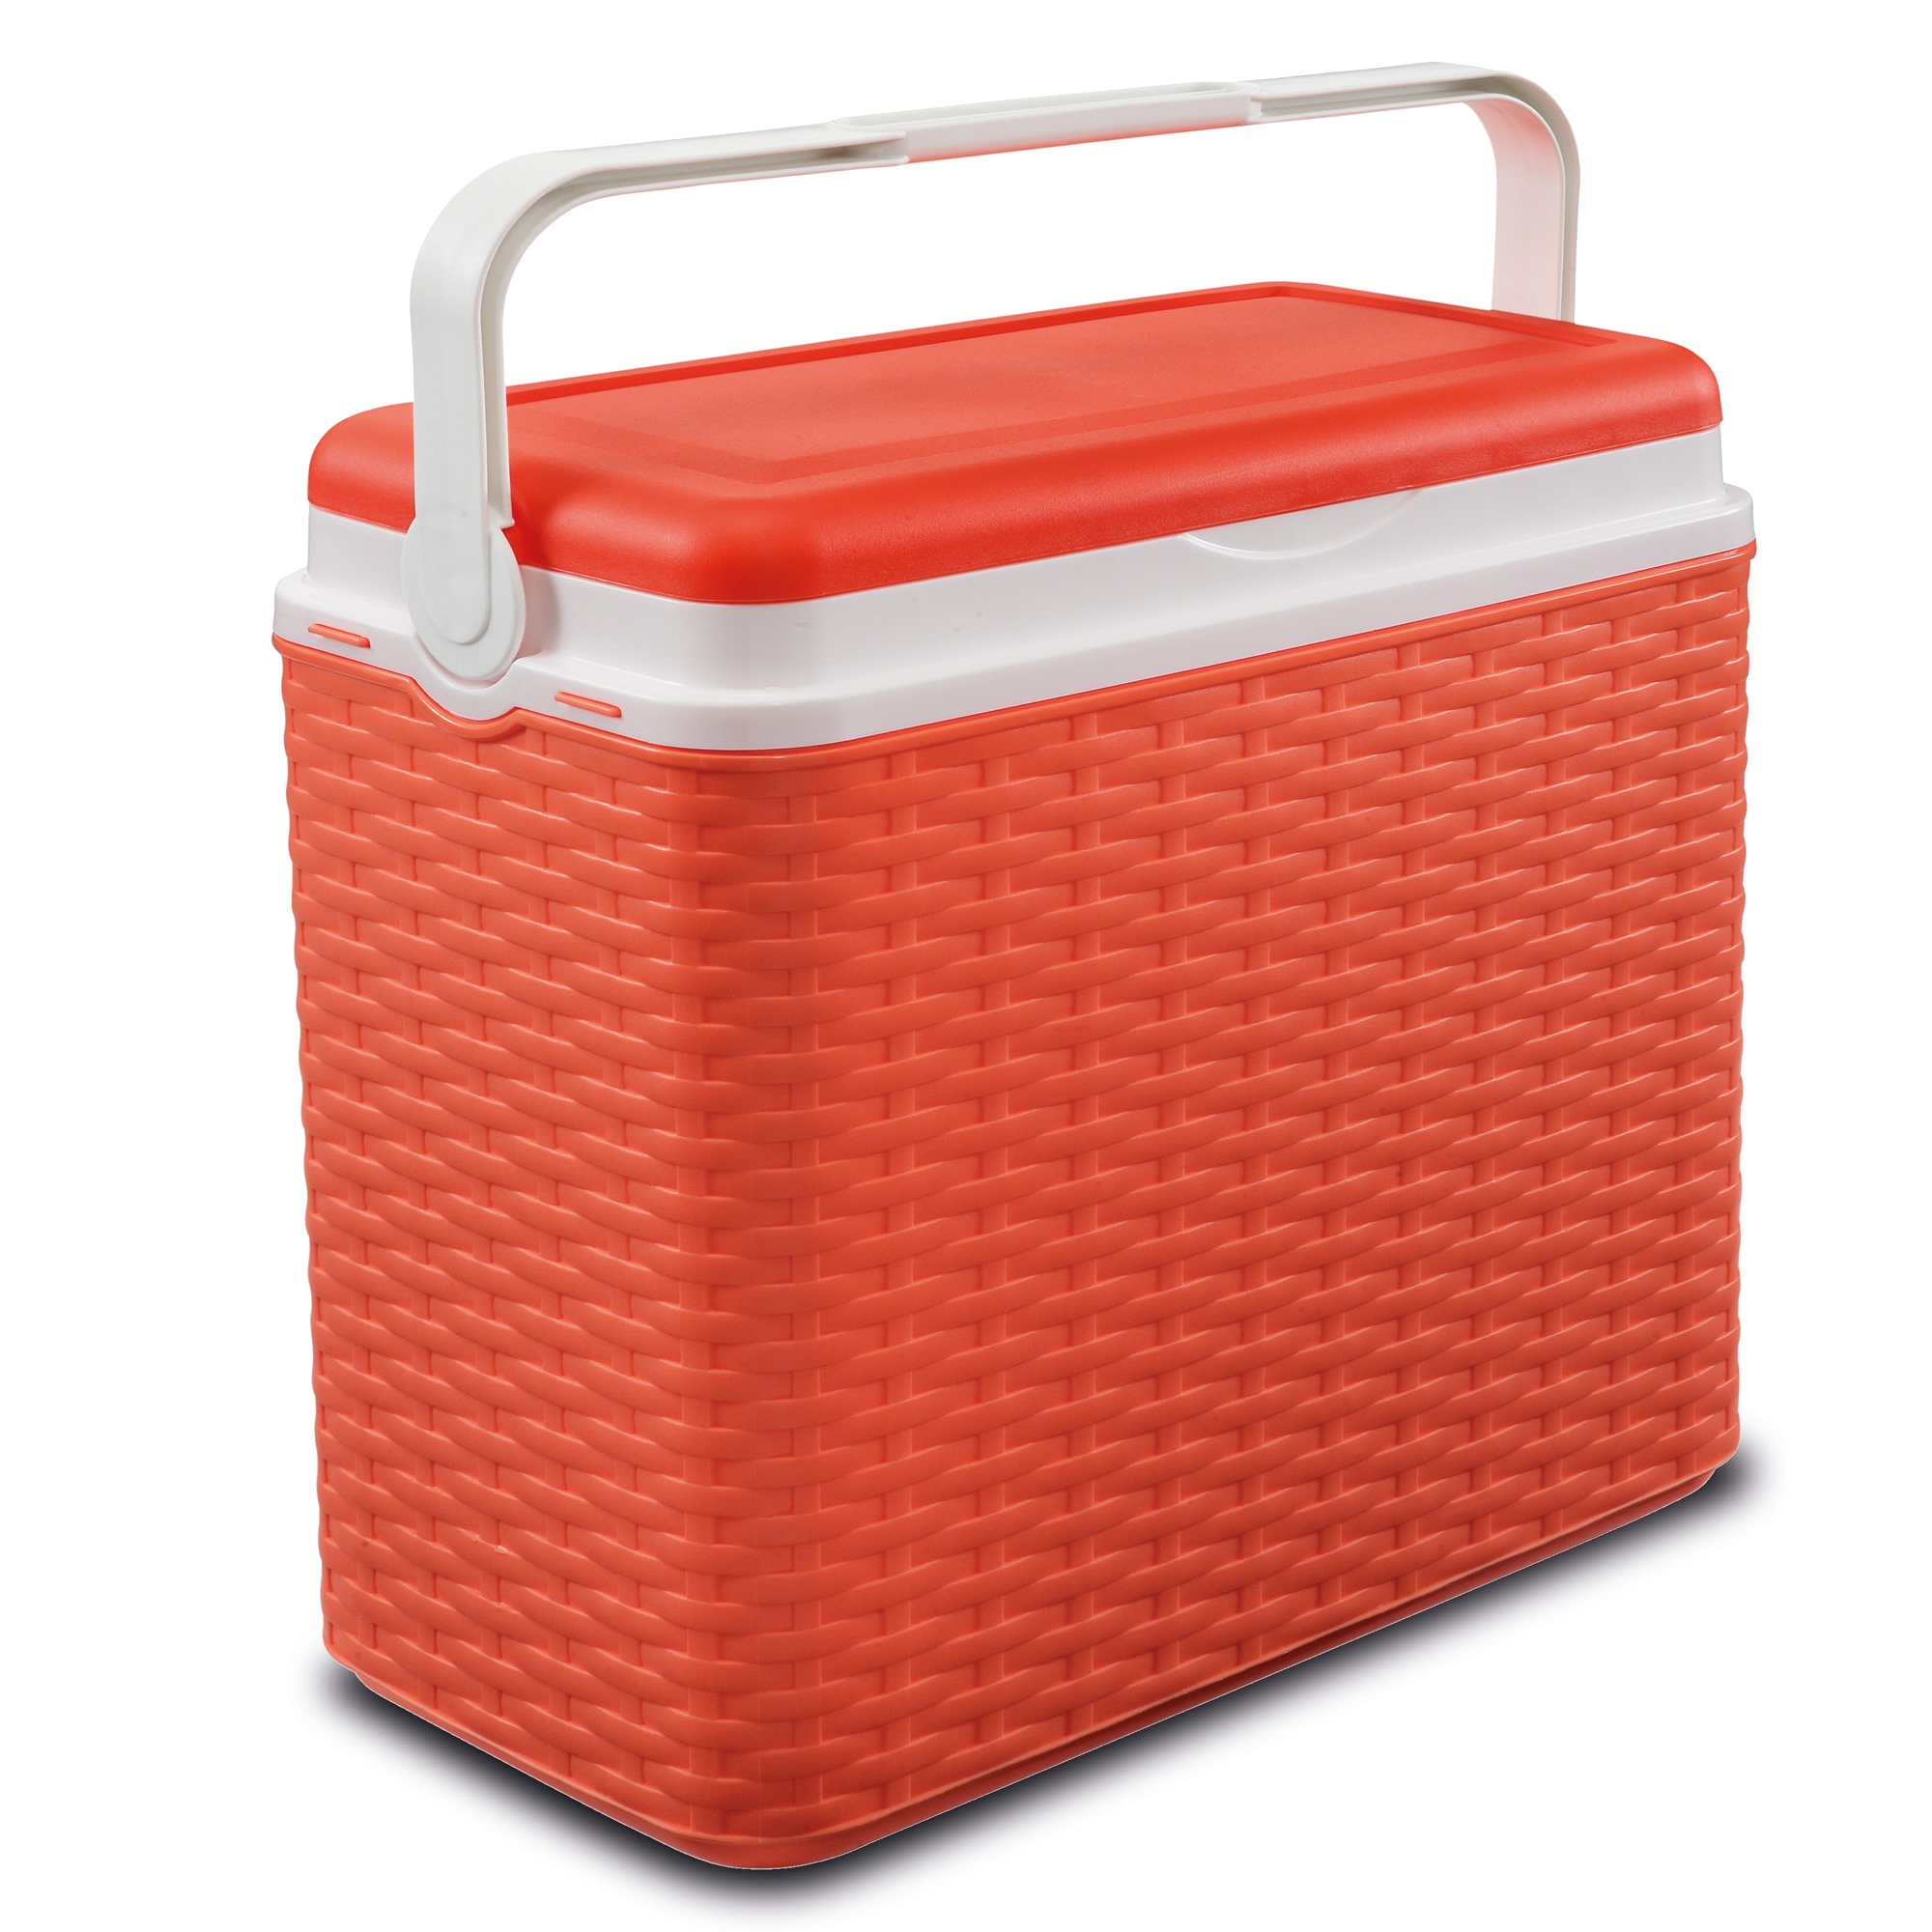 Large 24 Litre Rattan Design Cooler Box Lunch Picnic Beach Cool Ice ...